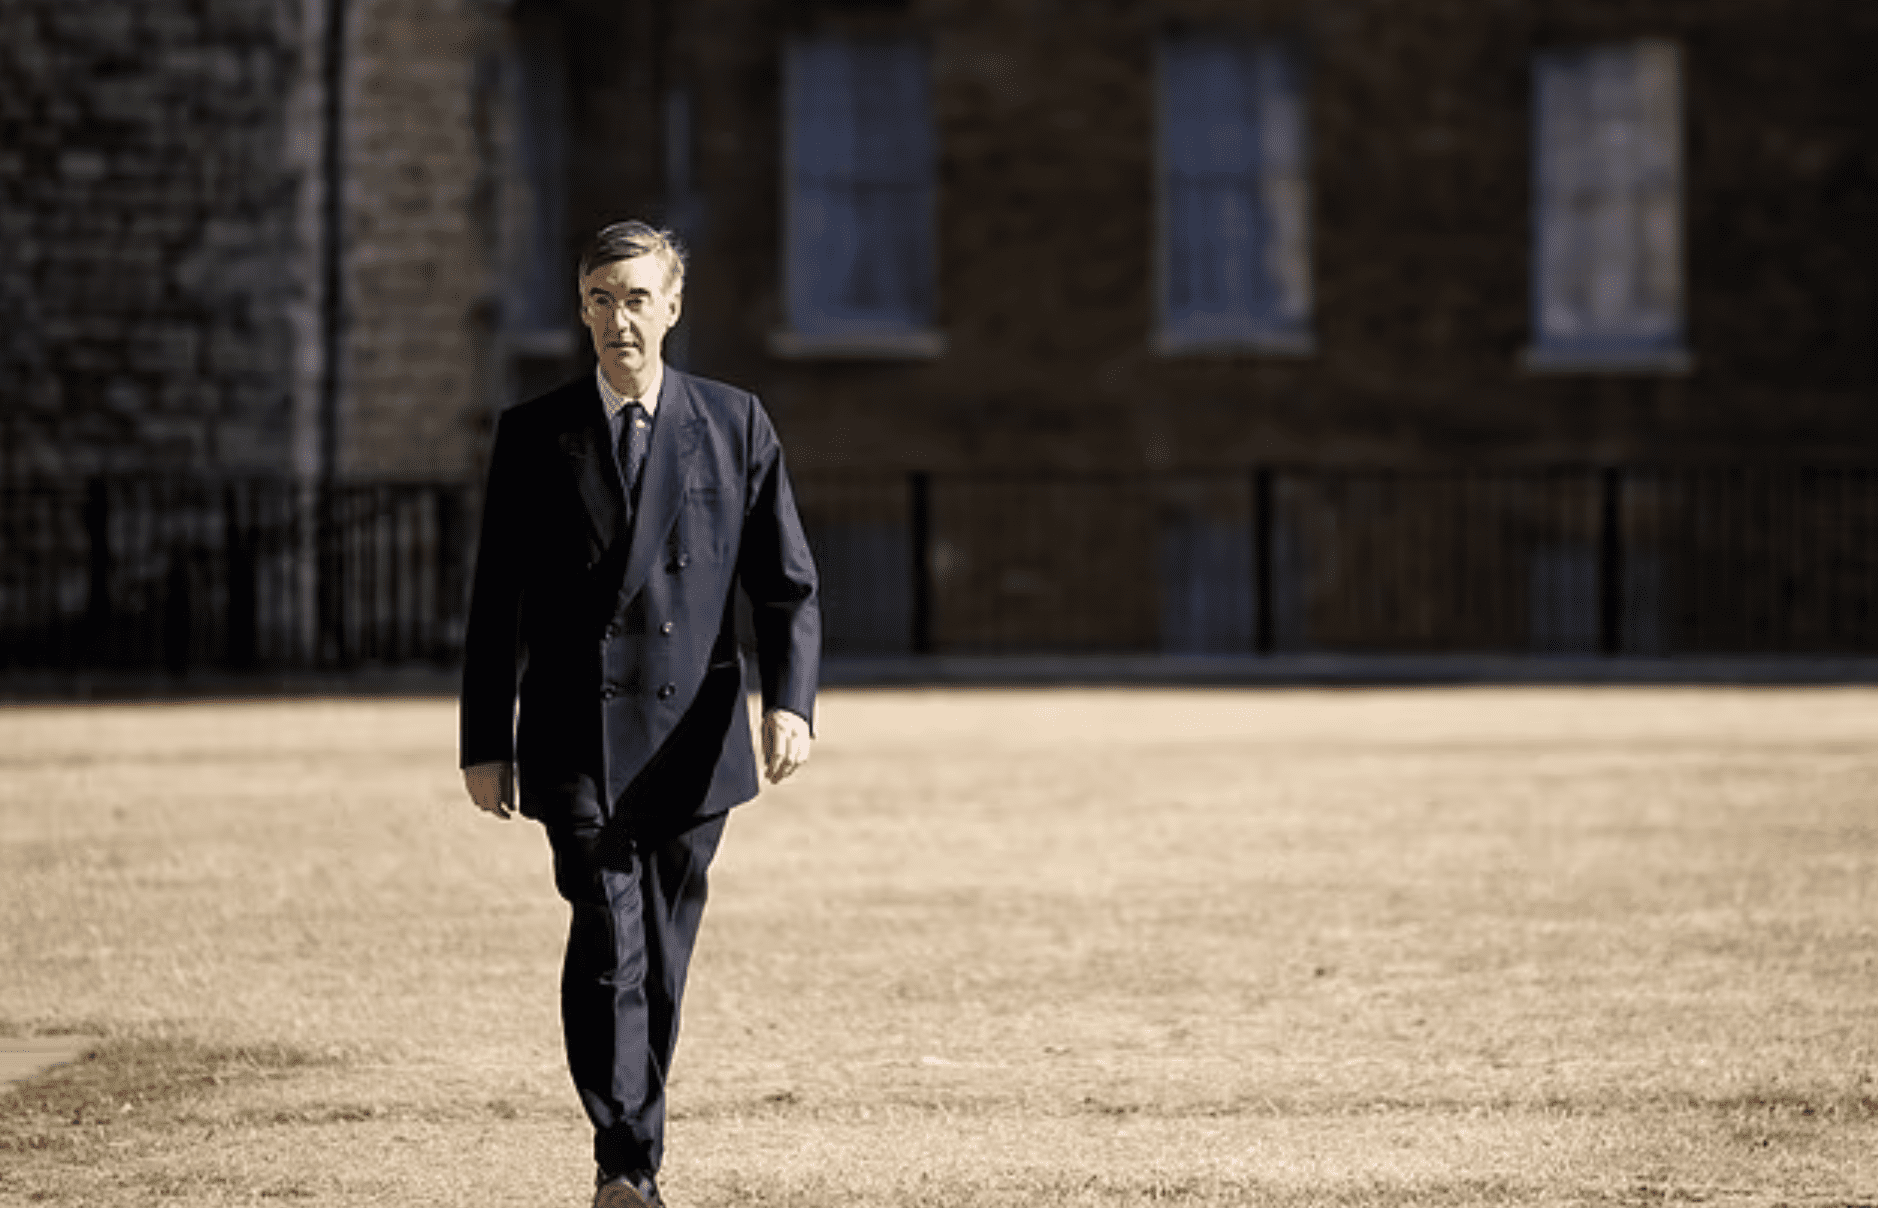 more-home-office-staff-working-from-home-than-before-jacob-rees-mogg’s-plea-to-civil-servants-to-return-to-office